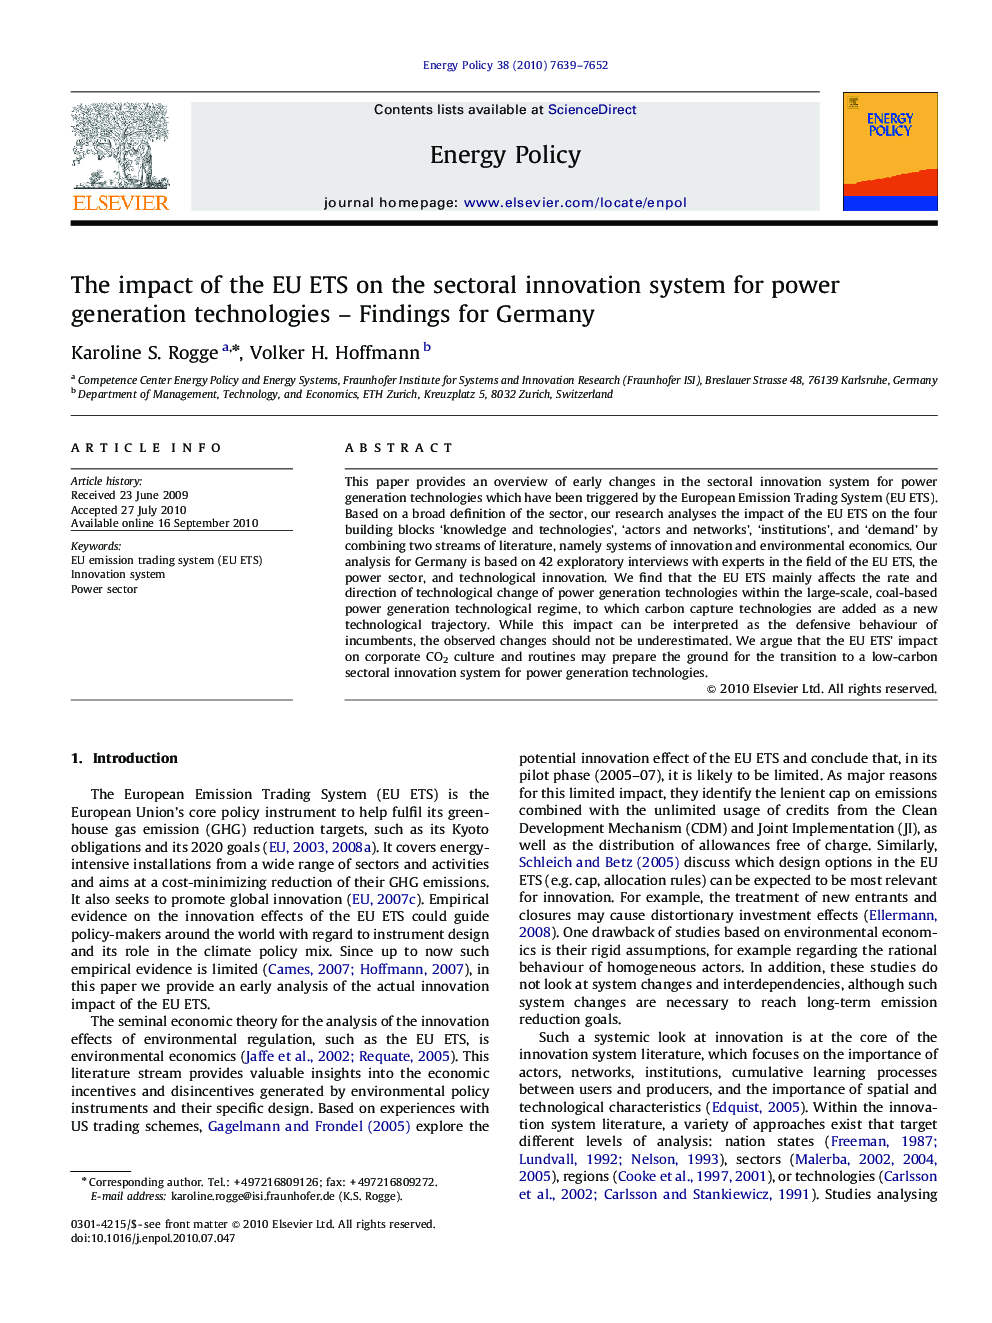 The impact of the EU ETS on the sectoral innovation system for power generation technologies – Findings for Germany